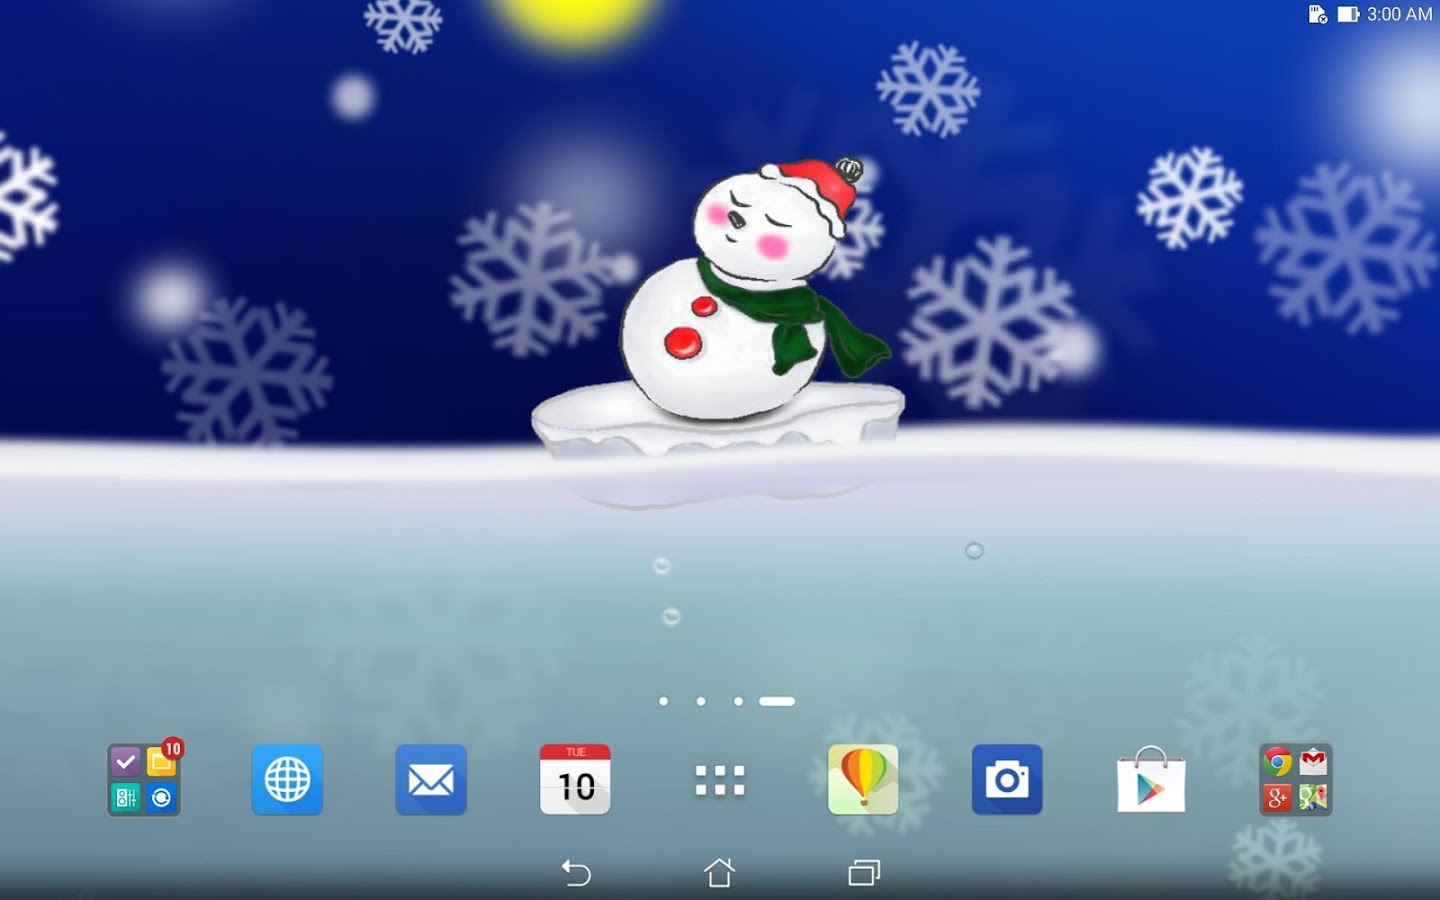 ASUS LiveWaterLive wallpaper   Android Apps on Google Play